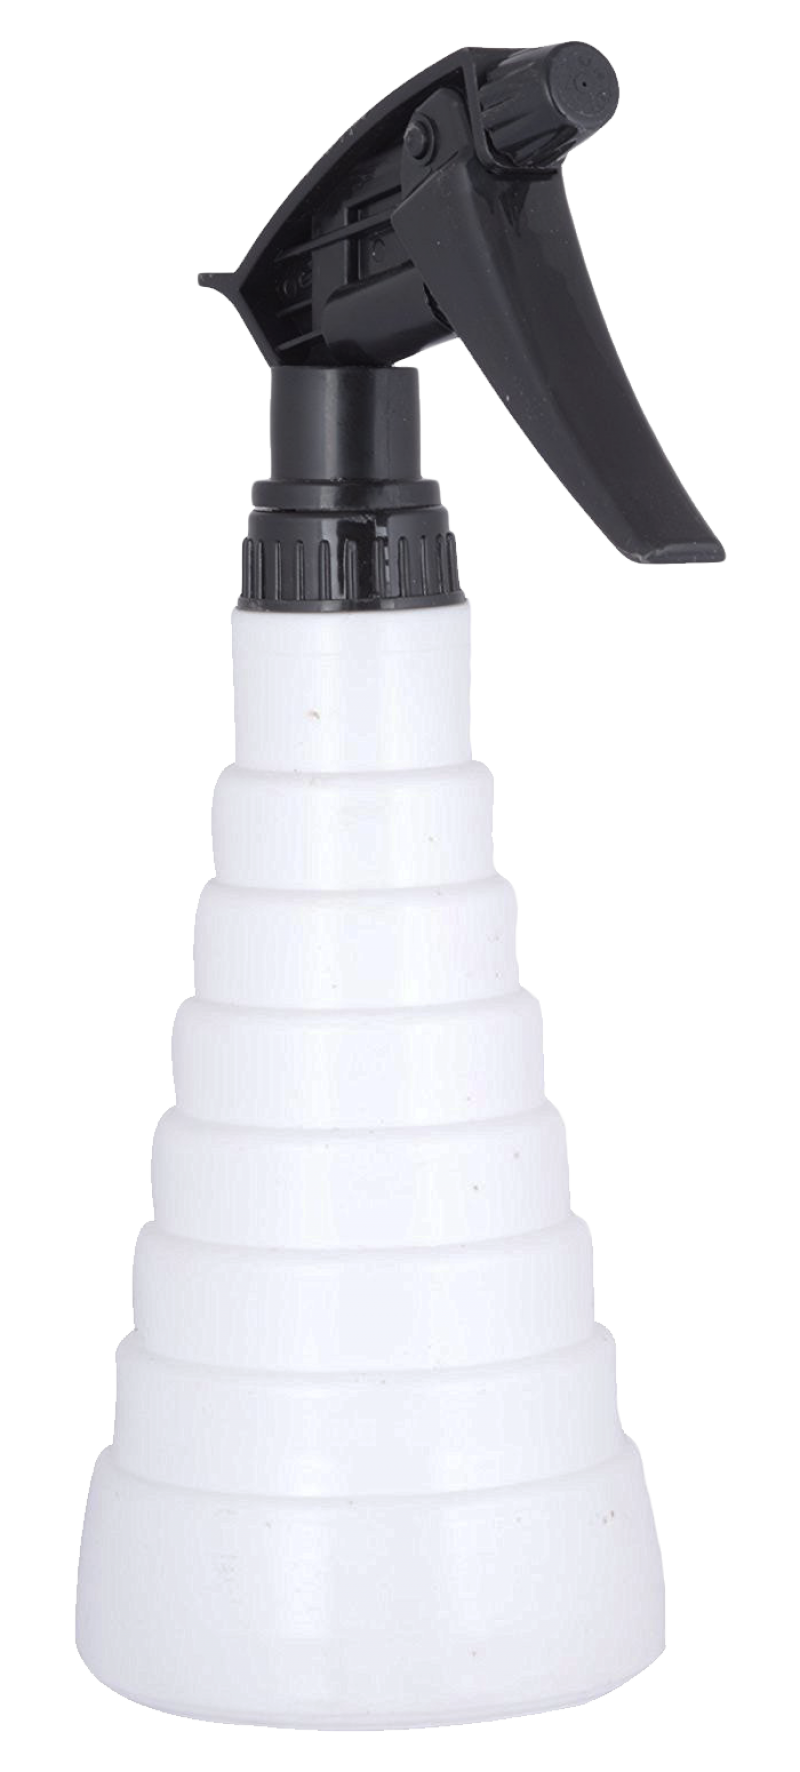 Download Spray Bottle PNG Image - PurePNG | Free transparent CC0 PNG Image Library